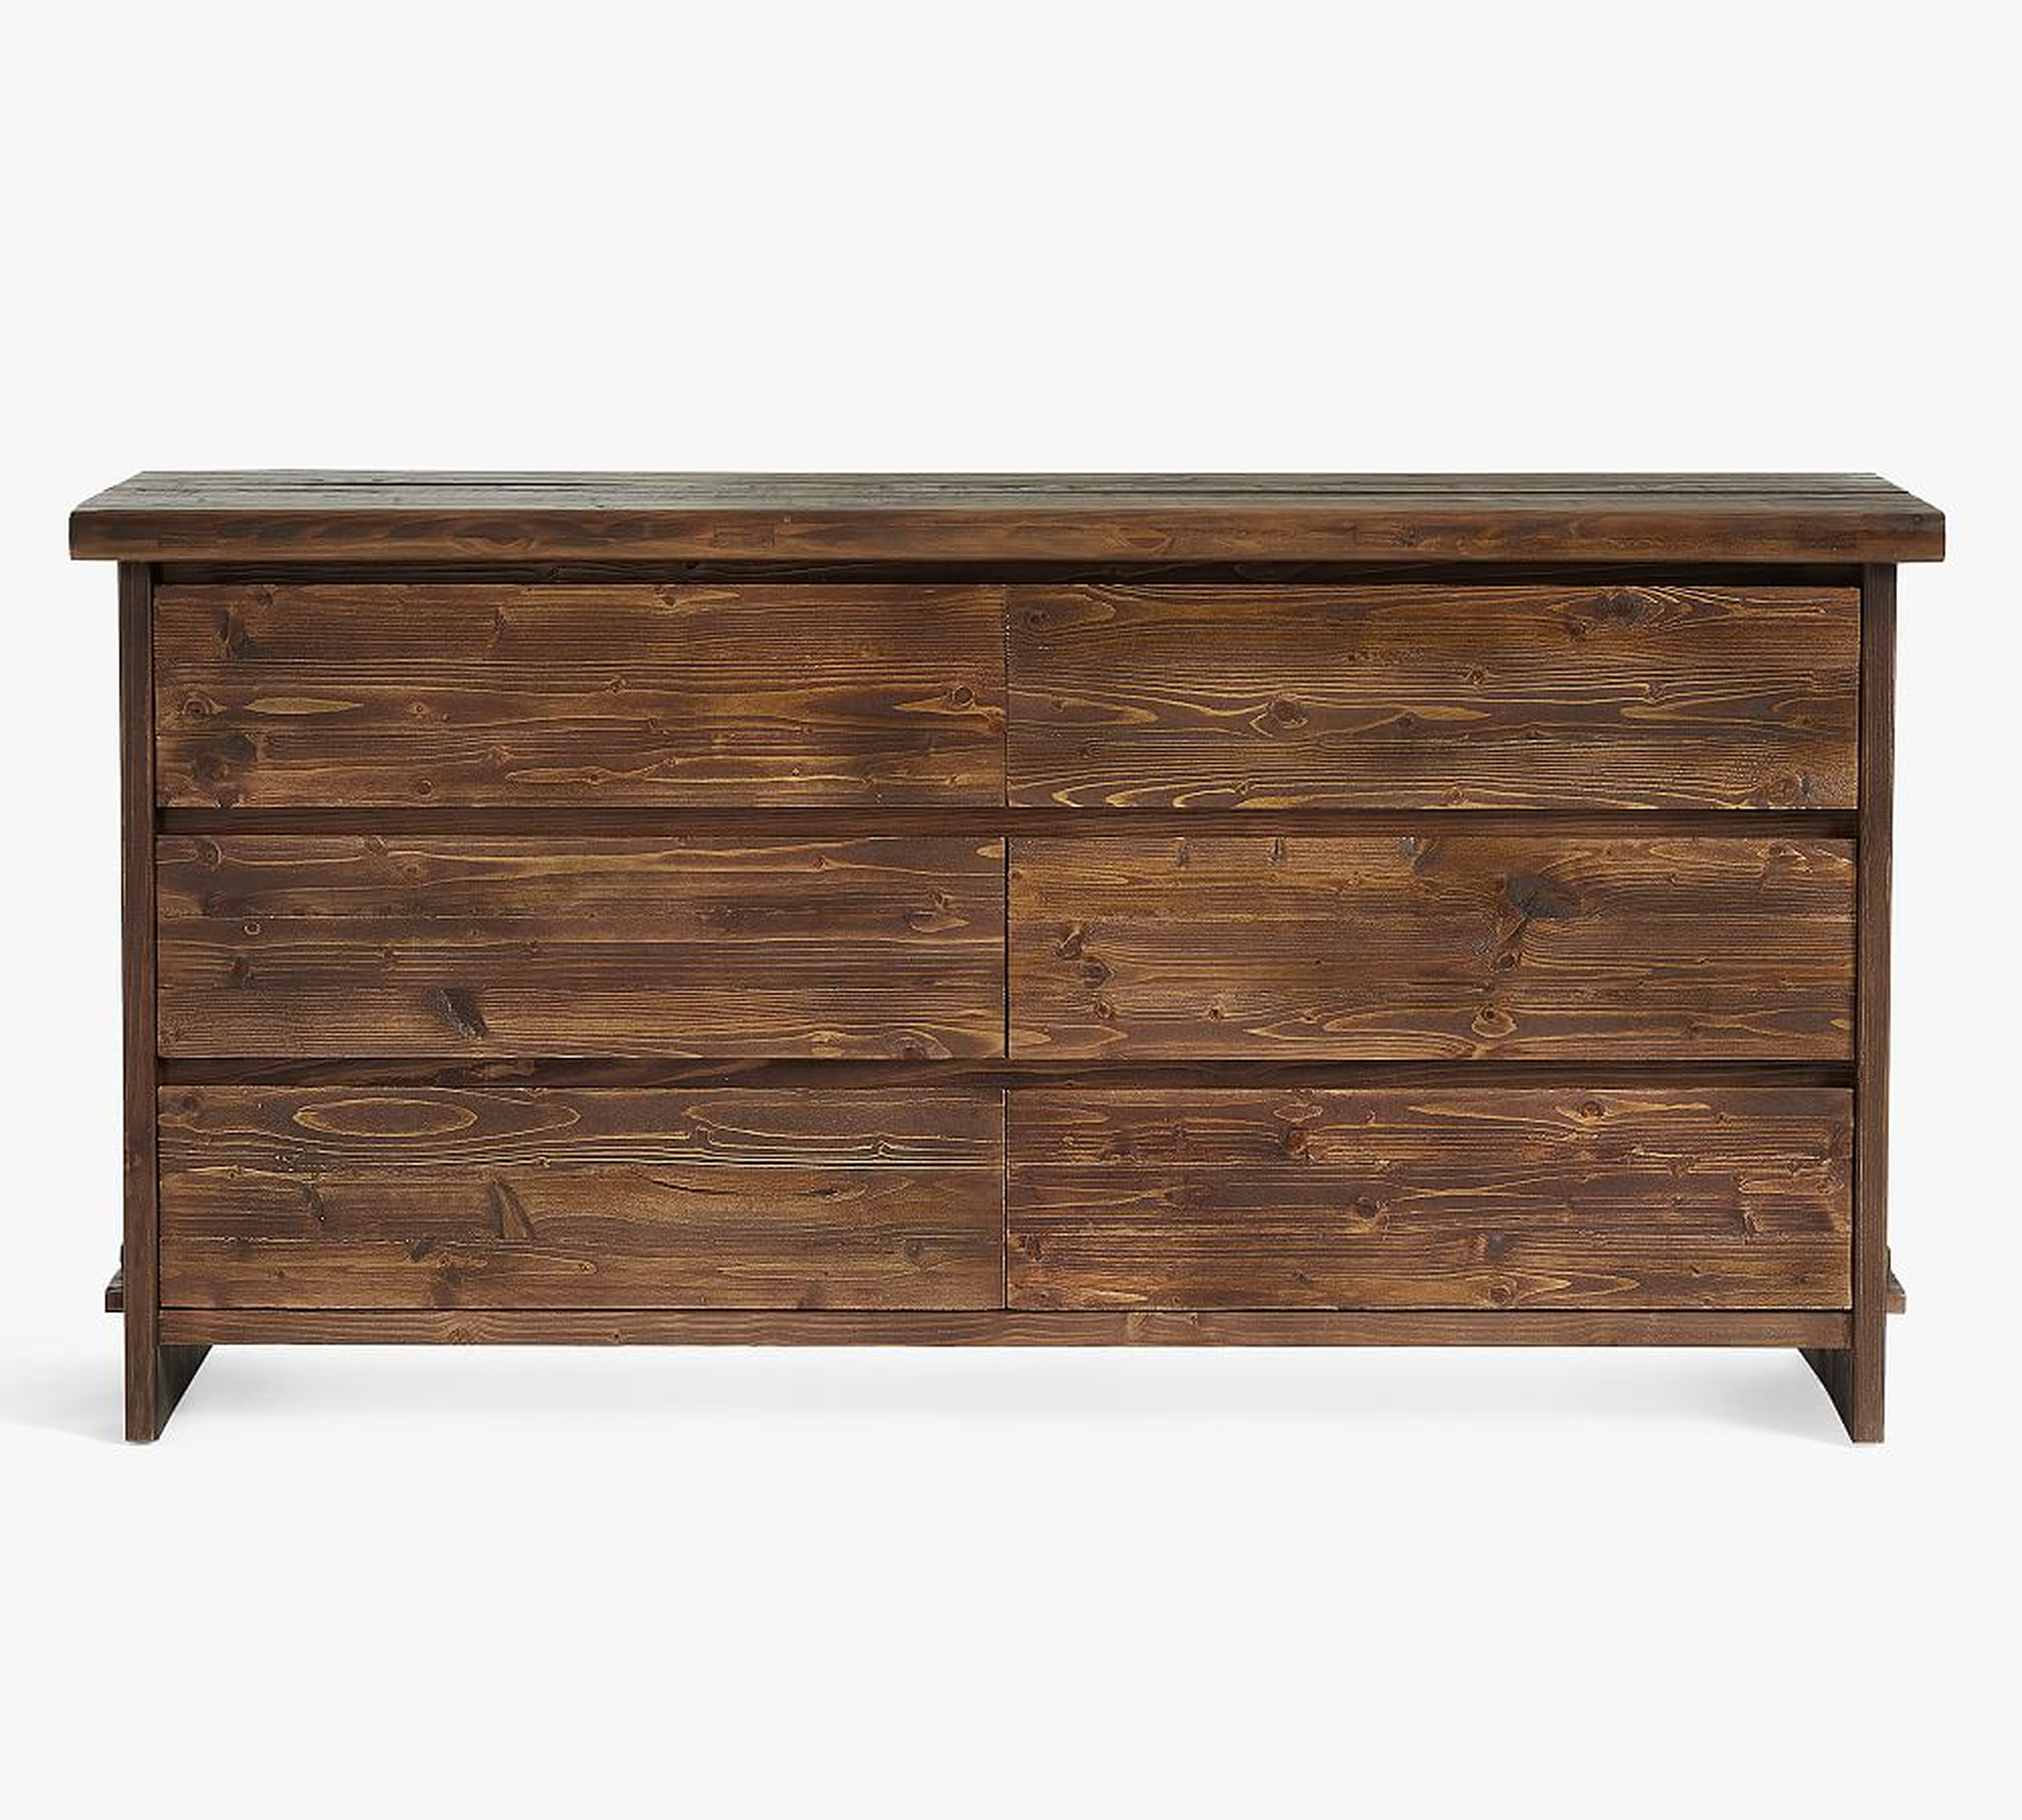 North Reclaimed Wood 6-Drawer Extra Wide Dresser, Rustic Barnwood - Pottery Barn